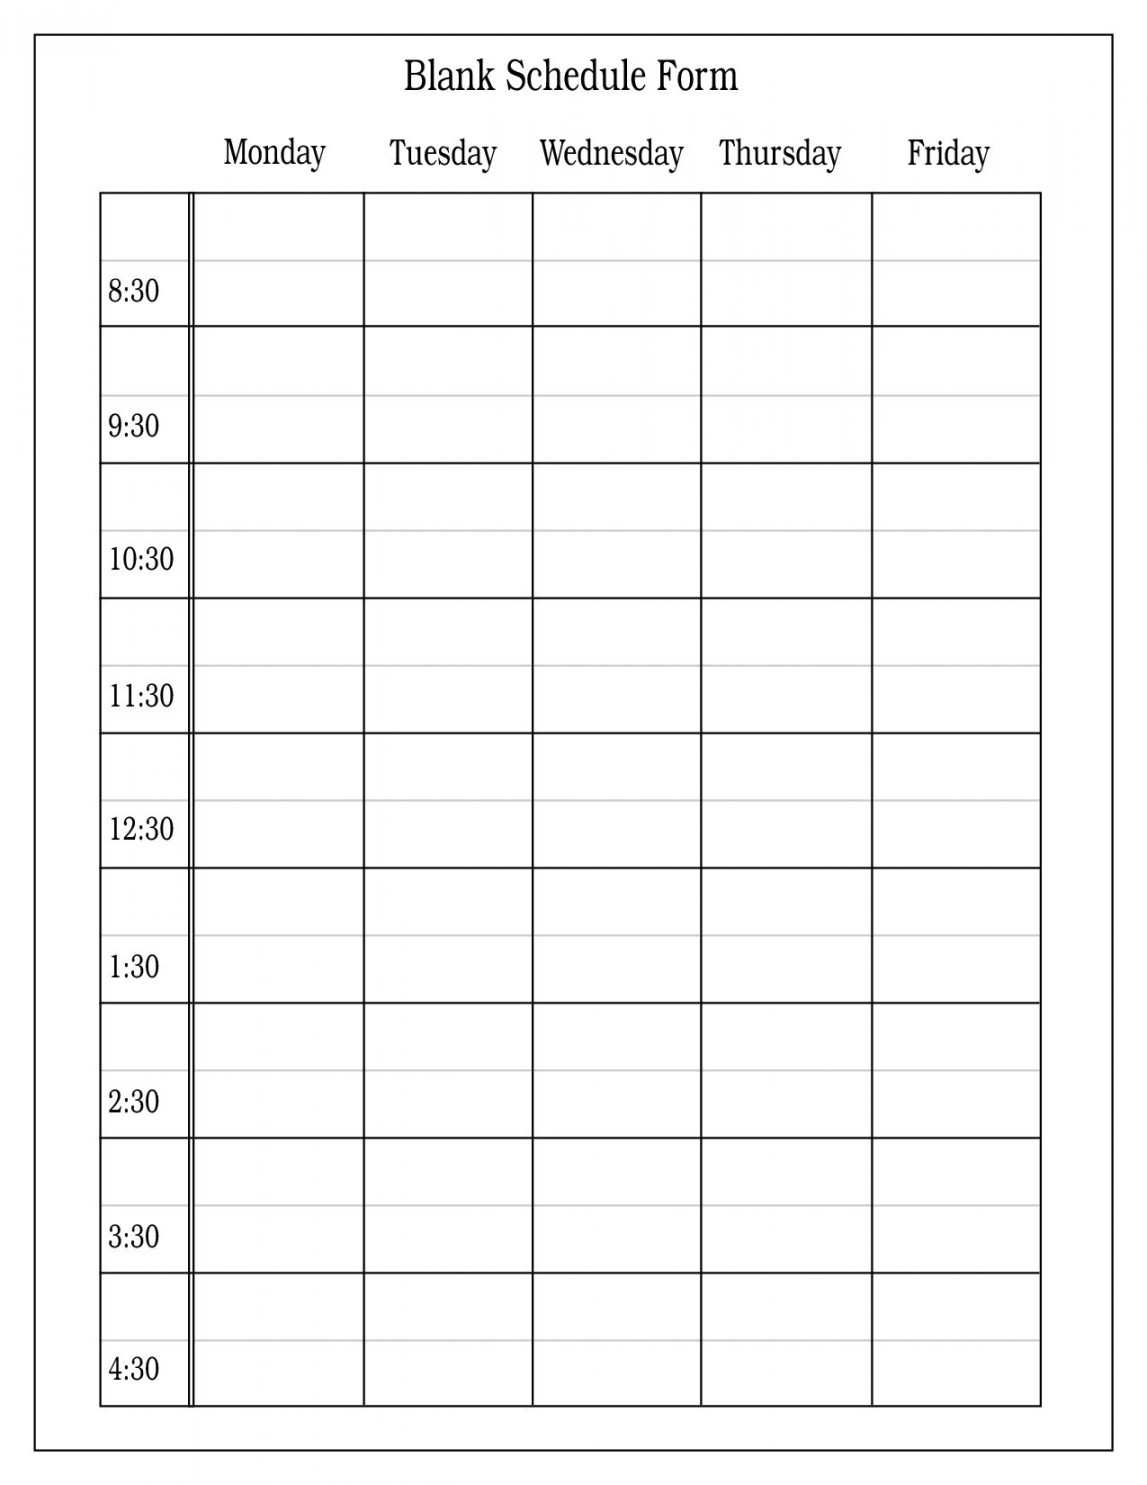 M-F Weekly Calendar Template  Daily schedule template, Daily